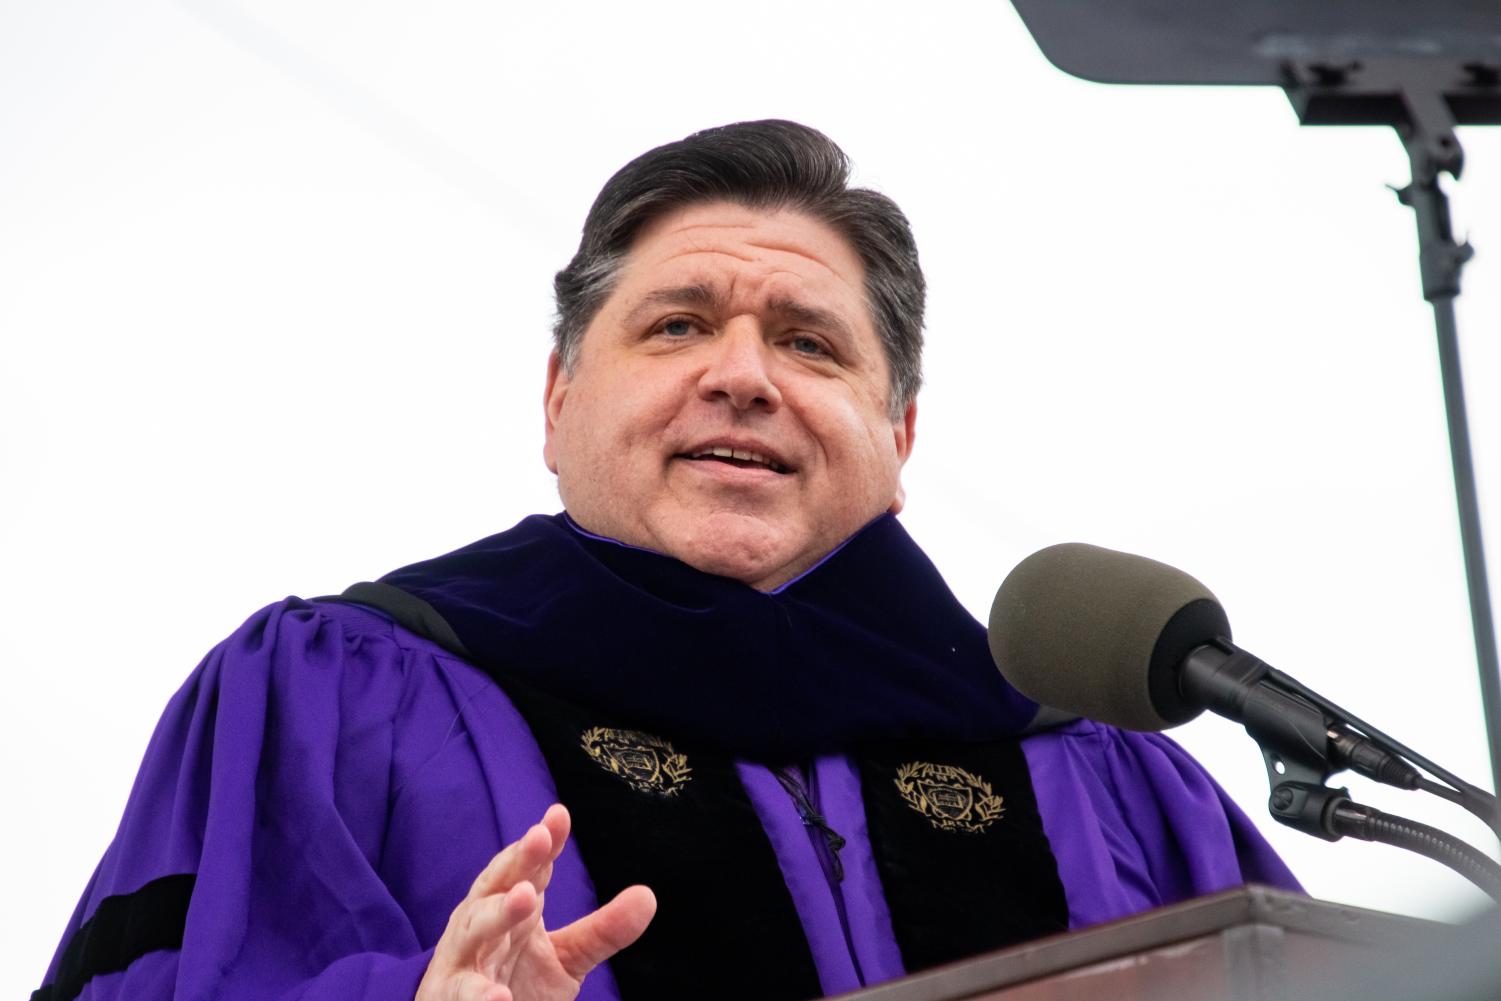 A person in a purple robe and black stole talks into a microphone at a podium.